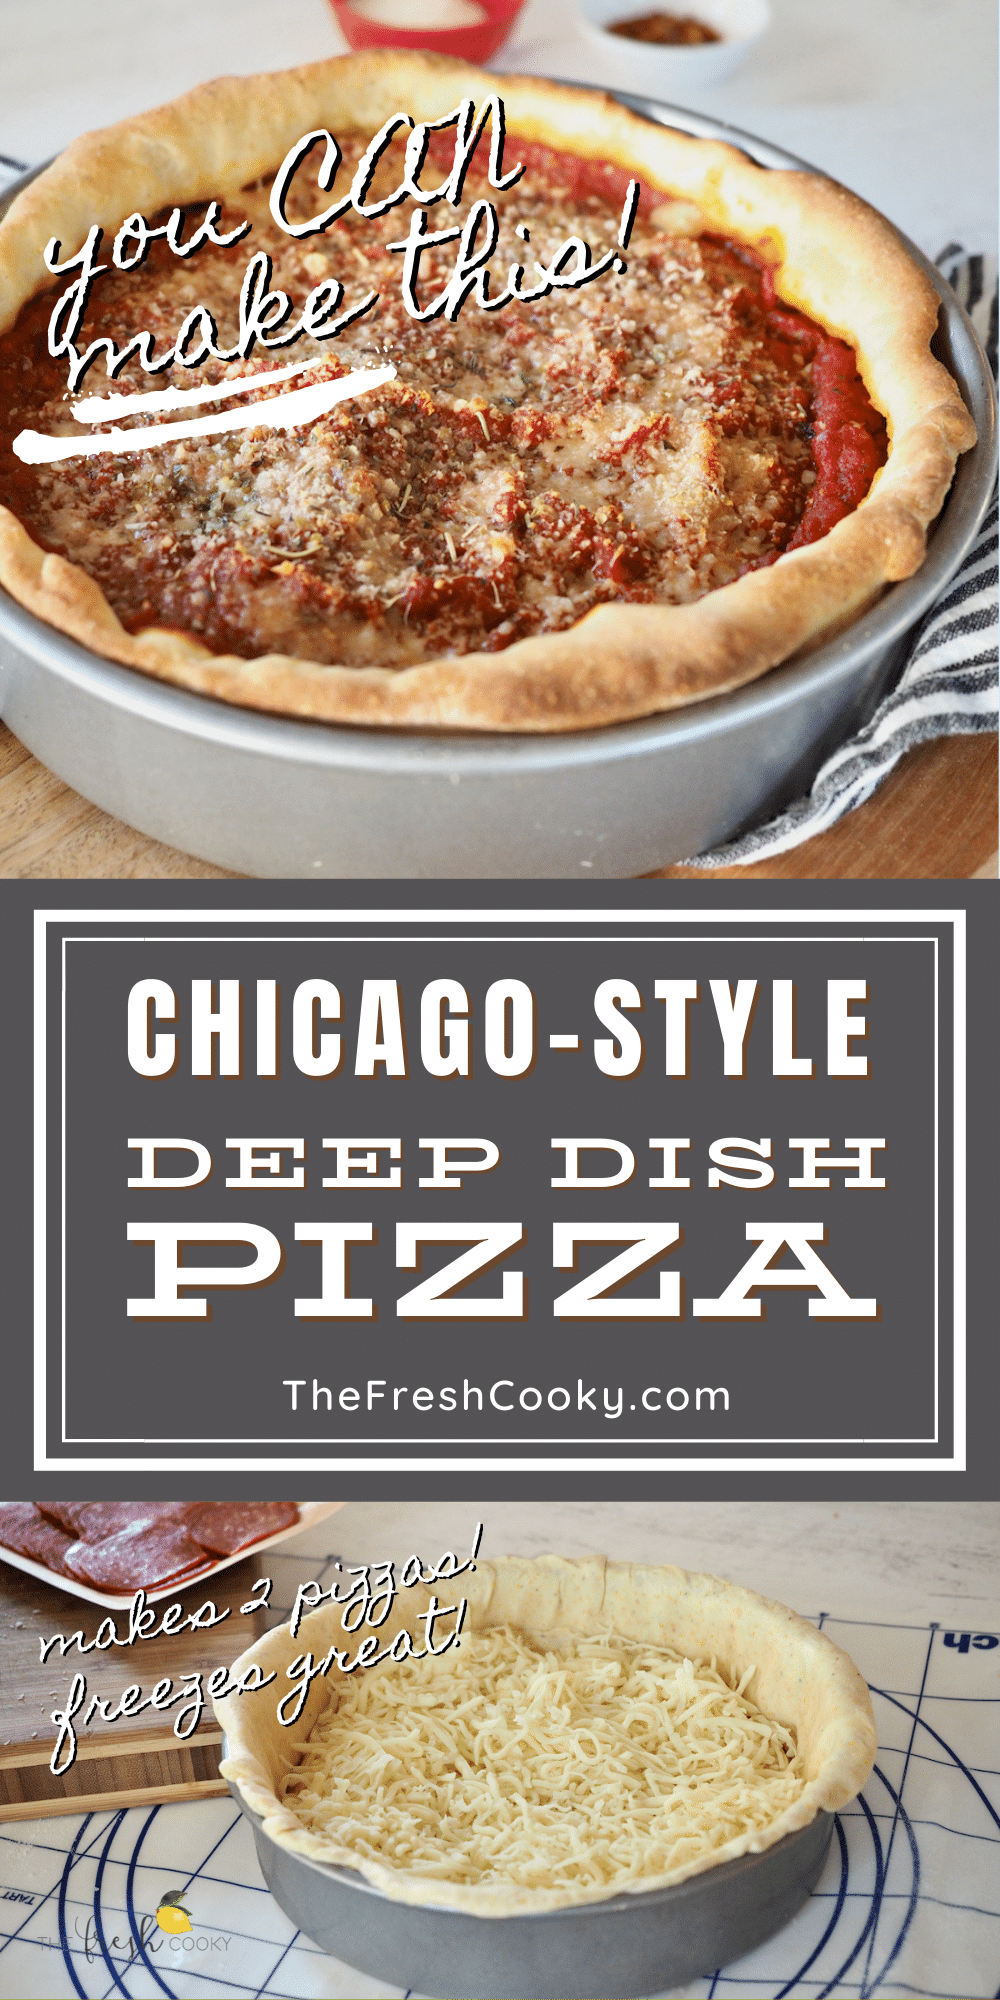 Chicago style deep dish pizza recipe pin with top image of full deep dish pizza pie and bottom image of pizza before baking filled with cheese.